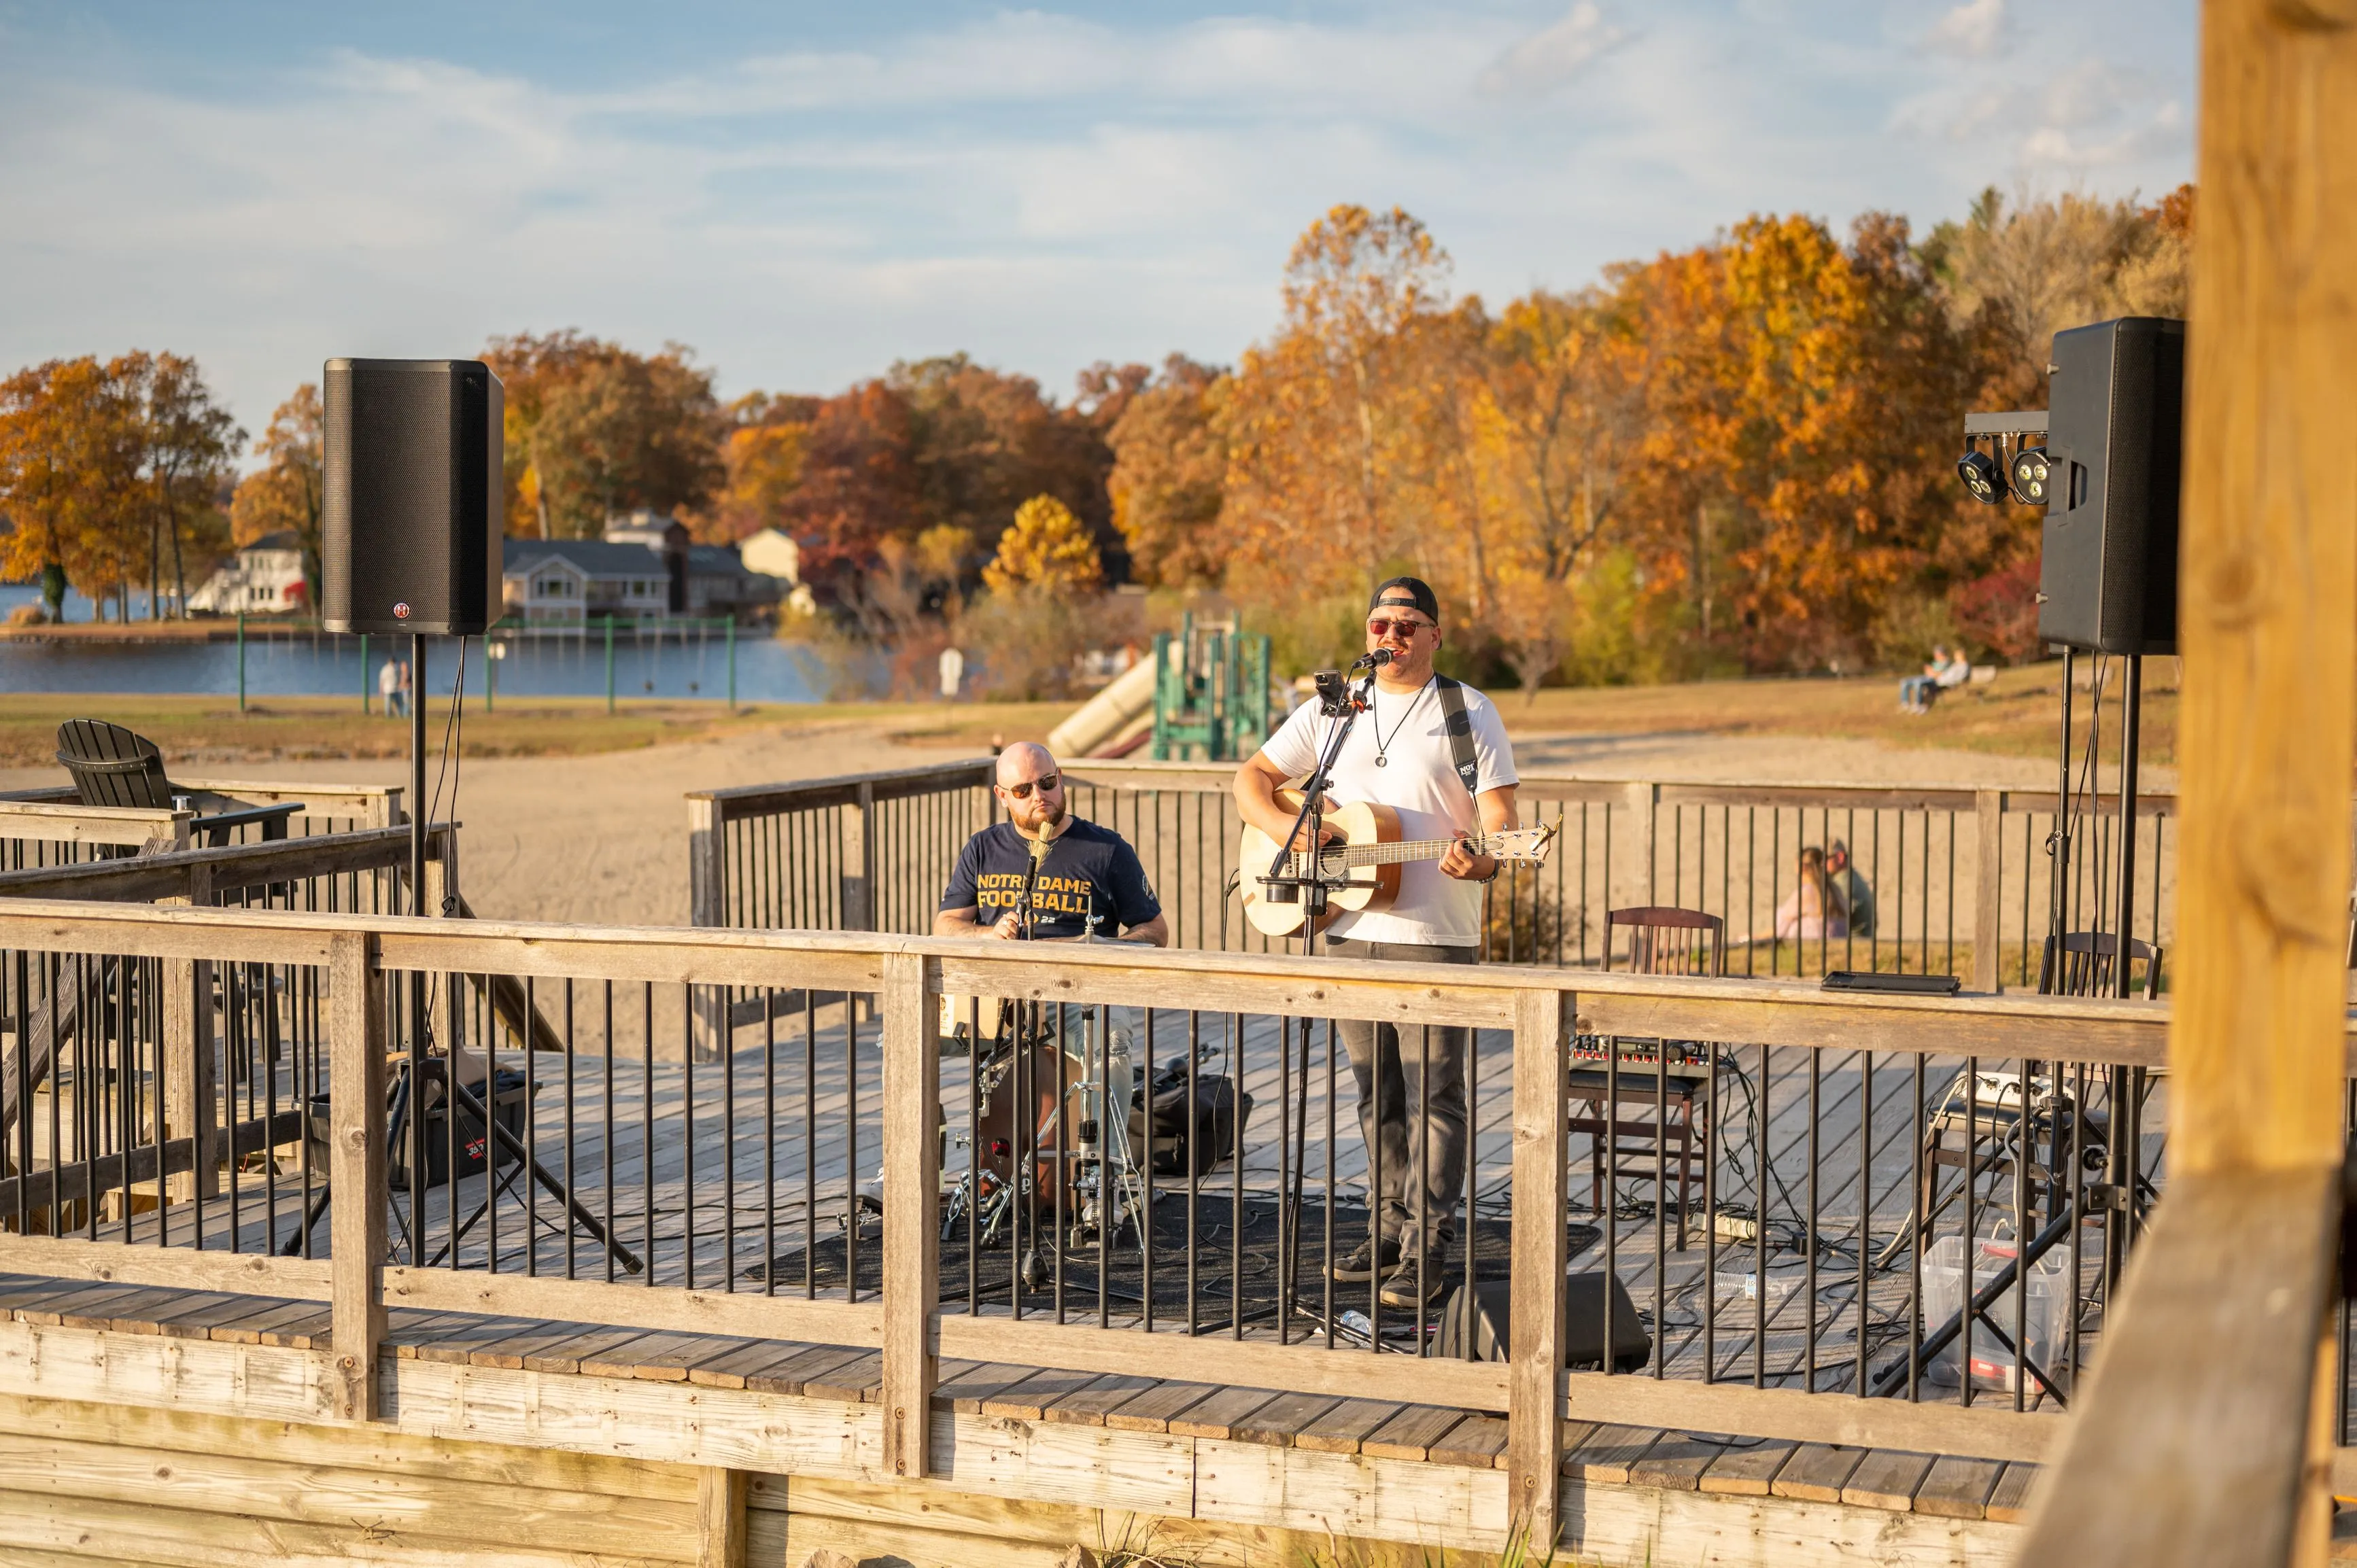 Two musicians performing outside on a waterfront deck with empty chairs and autumn trees in the background.